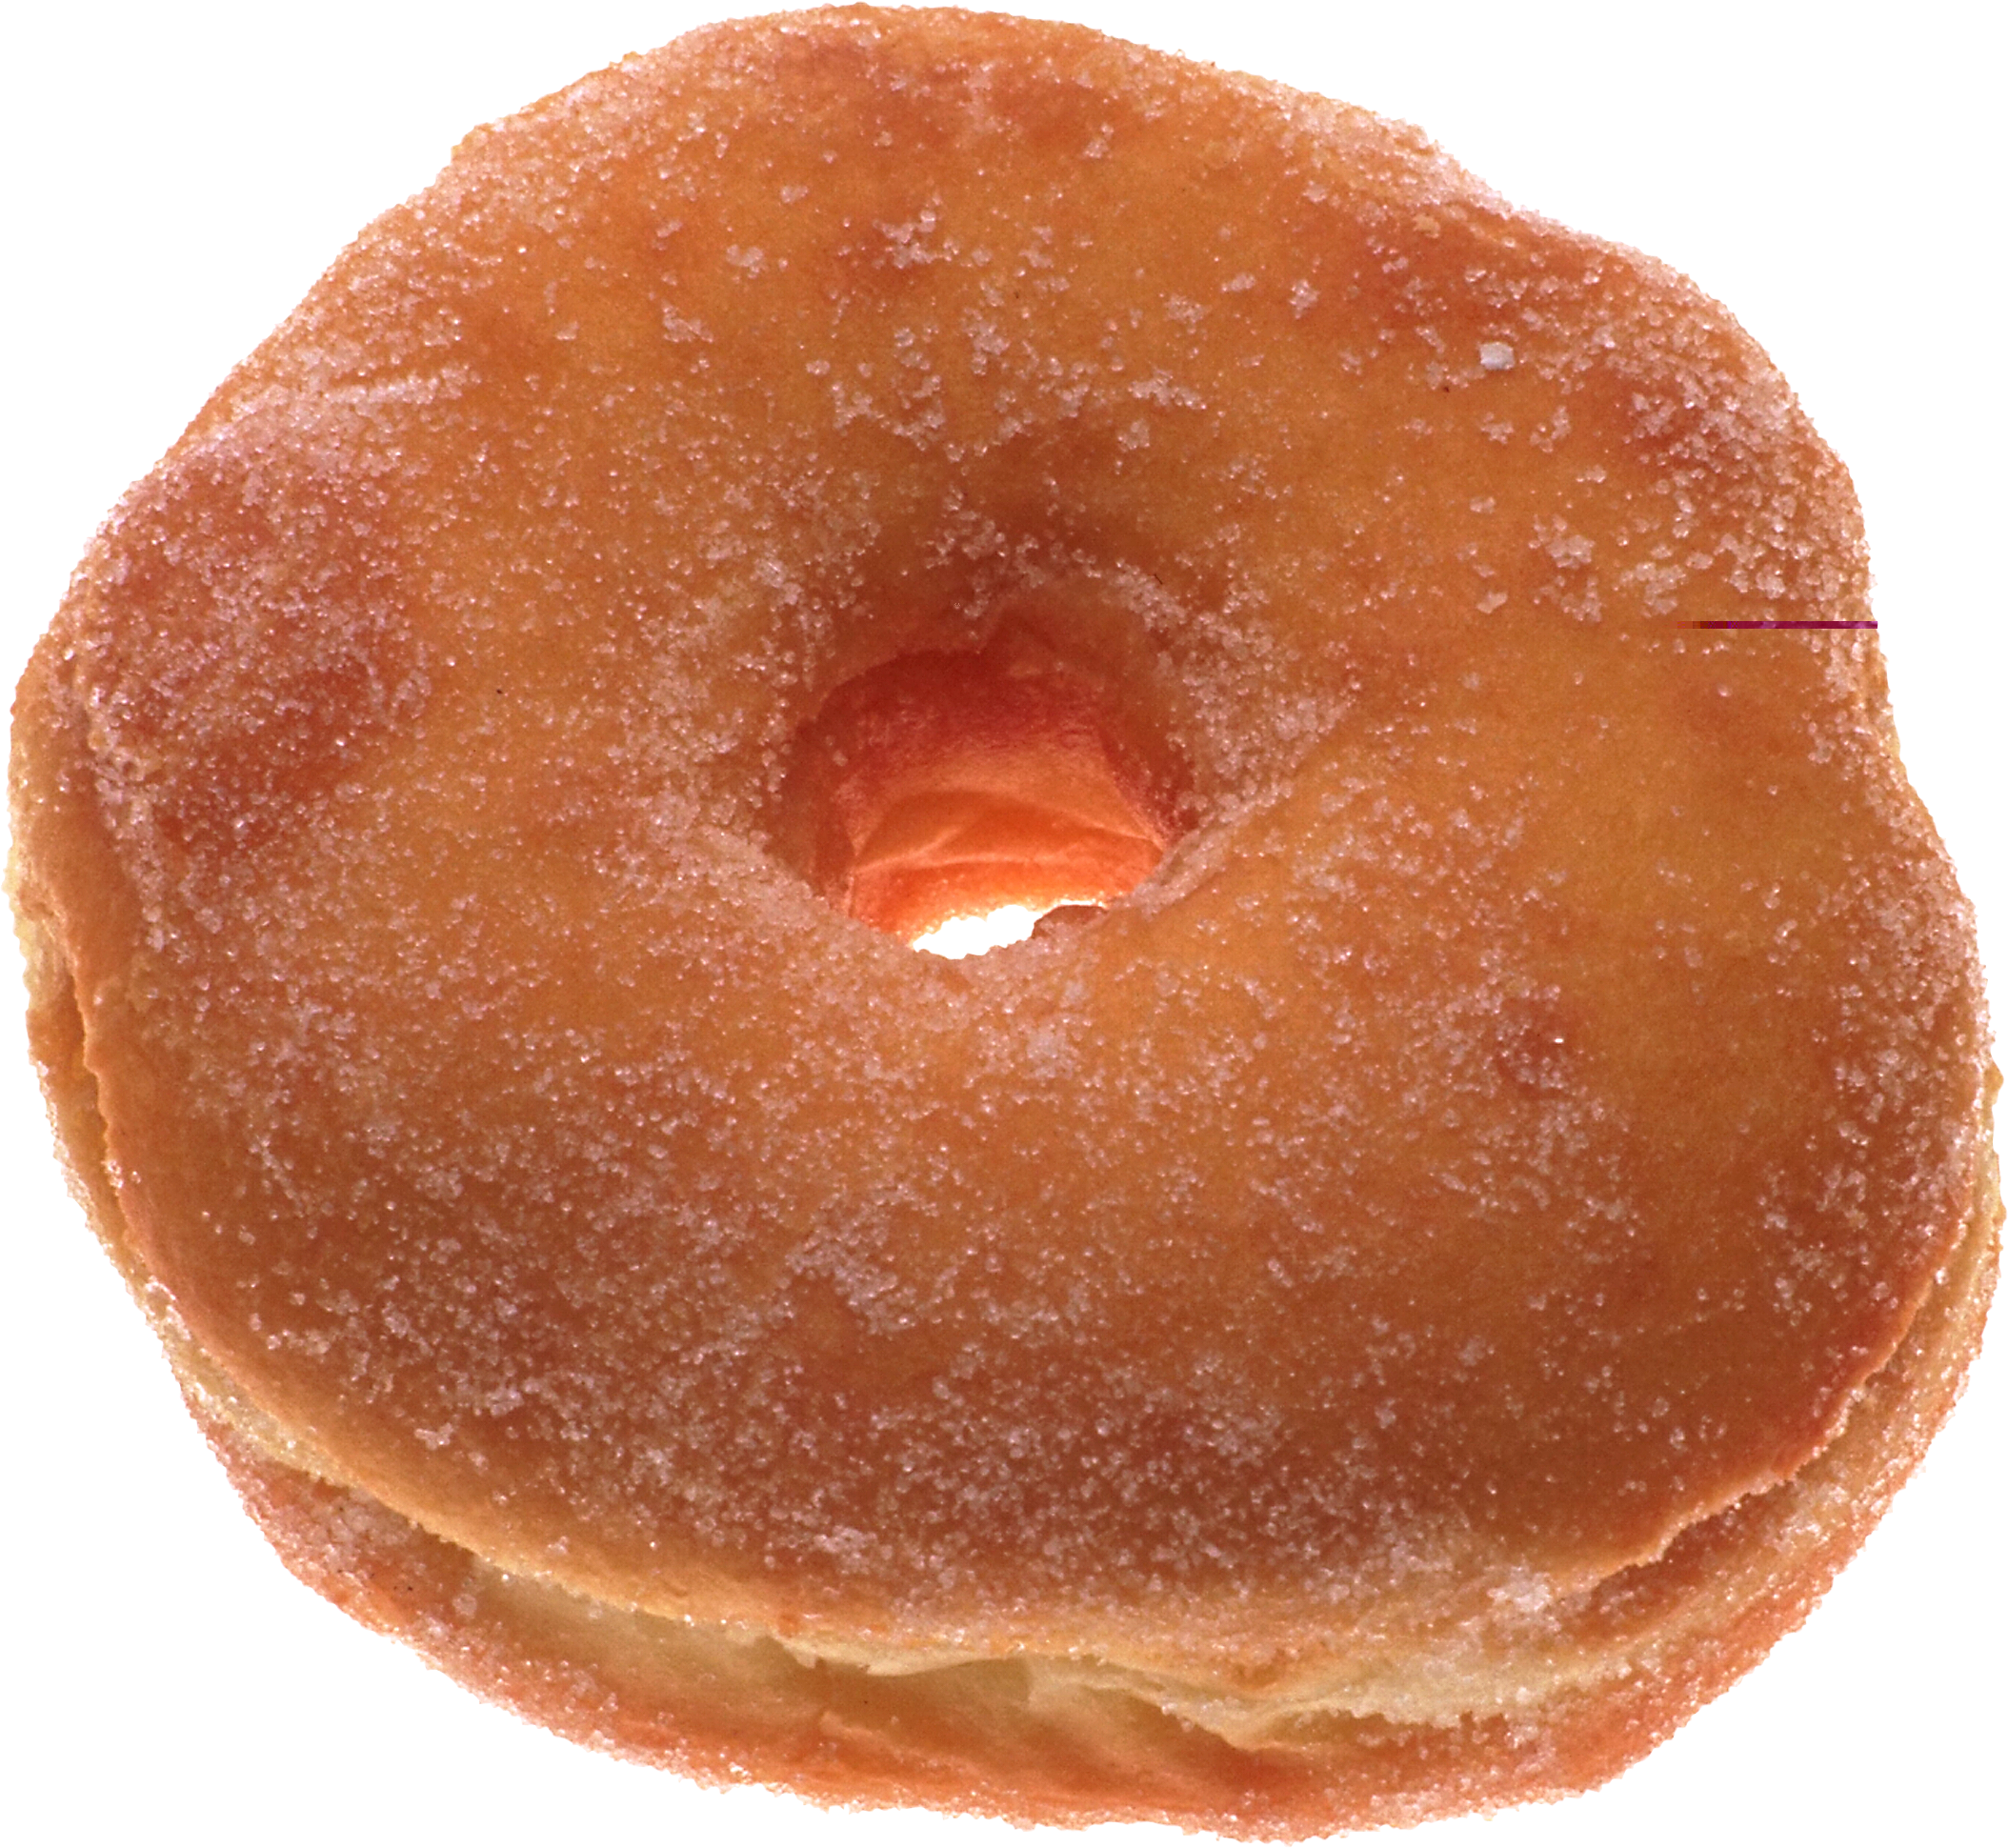 donuts clipart cider donuts